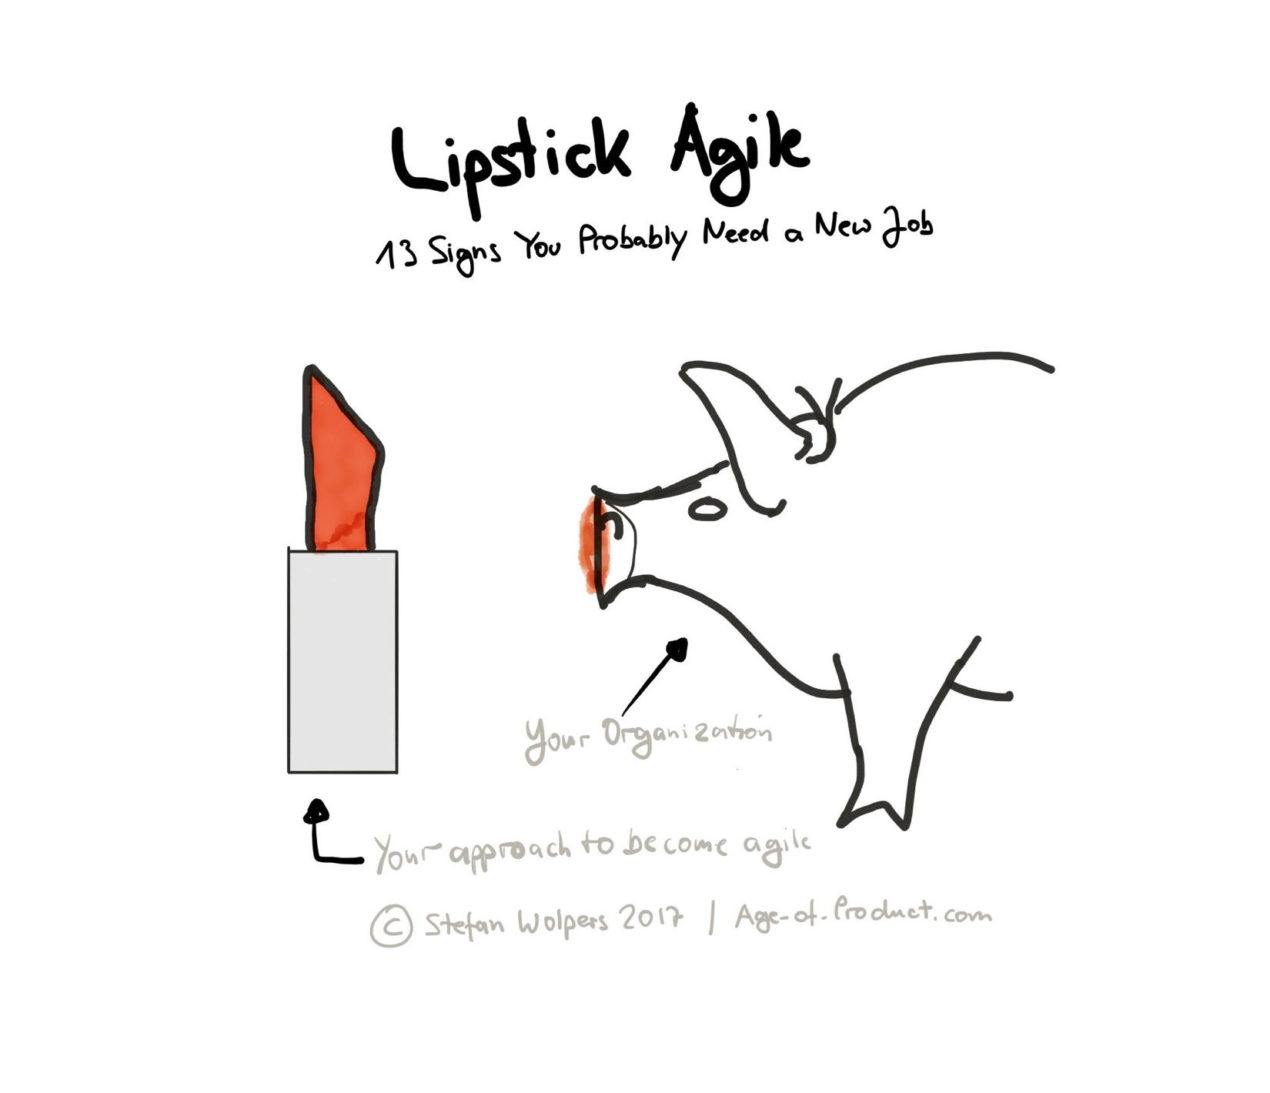 Lipstick Agile — 13 Signs You Probably Need a New Job  by Age of Product